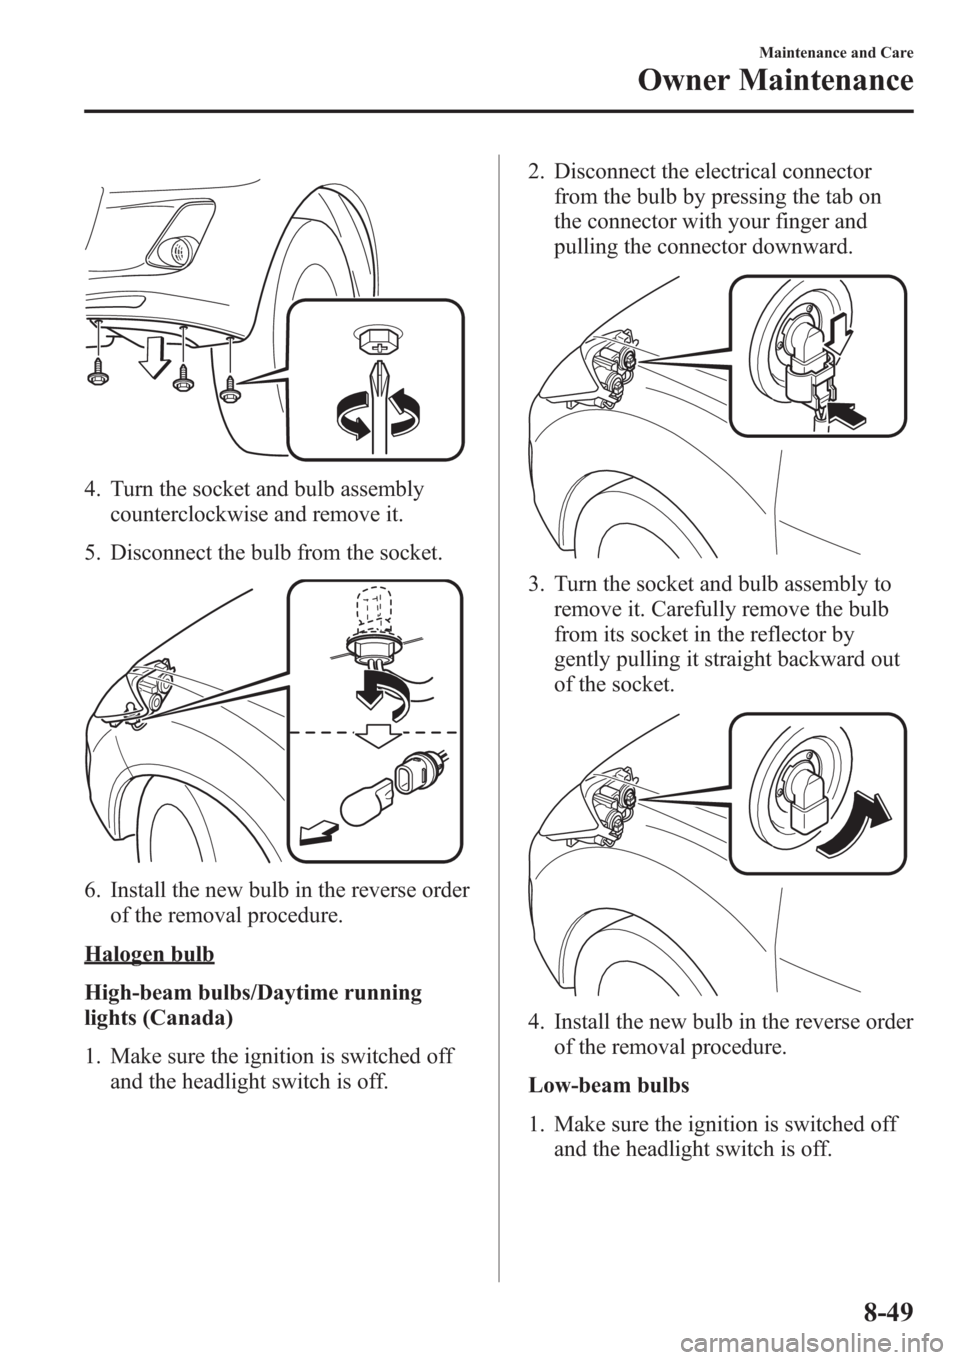 MAZDA MODEL 3 HATCHBACK 2013  Owners Manual (in English) 4. Turn the socket and bulb assembly
counterclockwise and remove it.
5. Disconnect the bulb from the socket.
6. Install the new bulb in the reverse order
of the removal procedure.
Halogen bulb
High-be